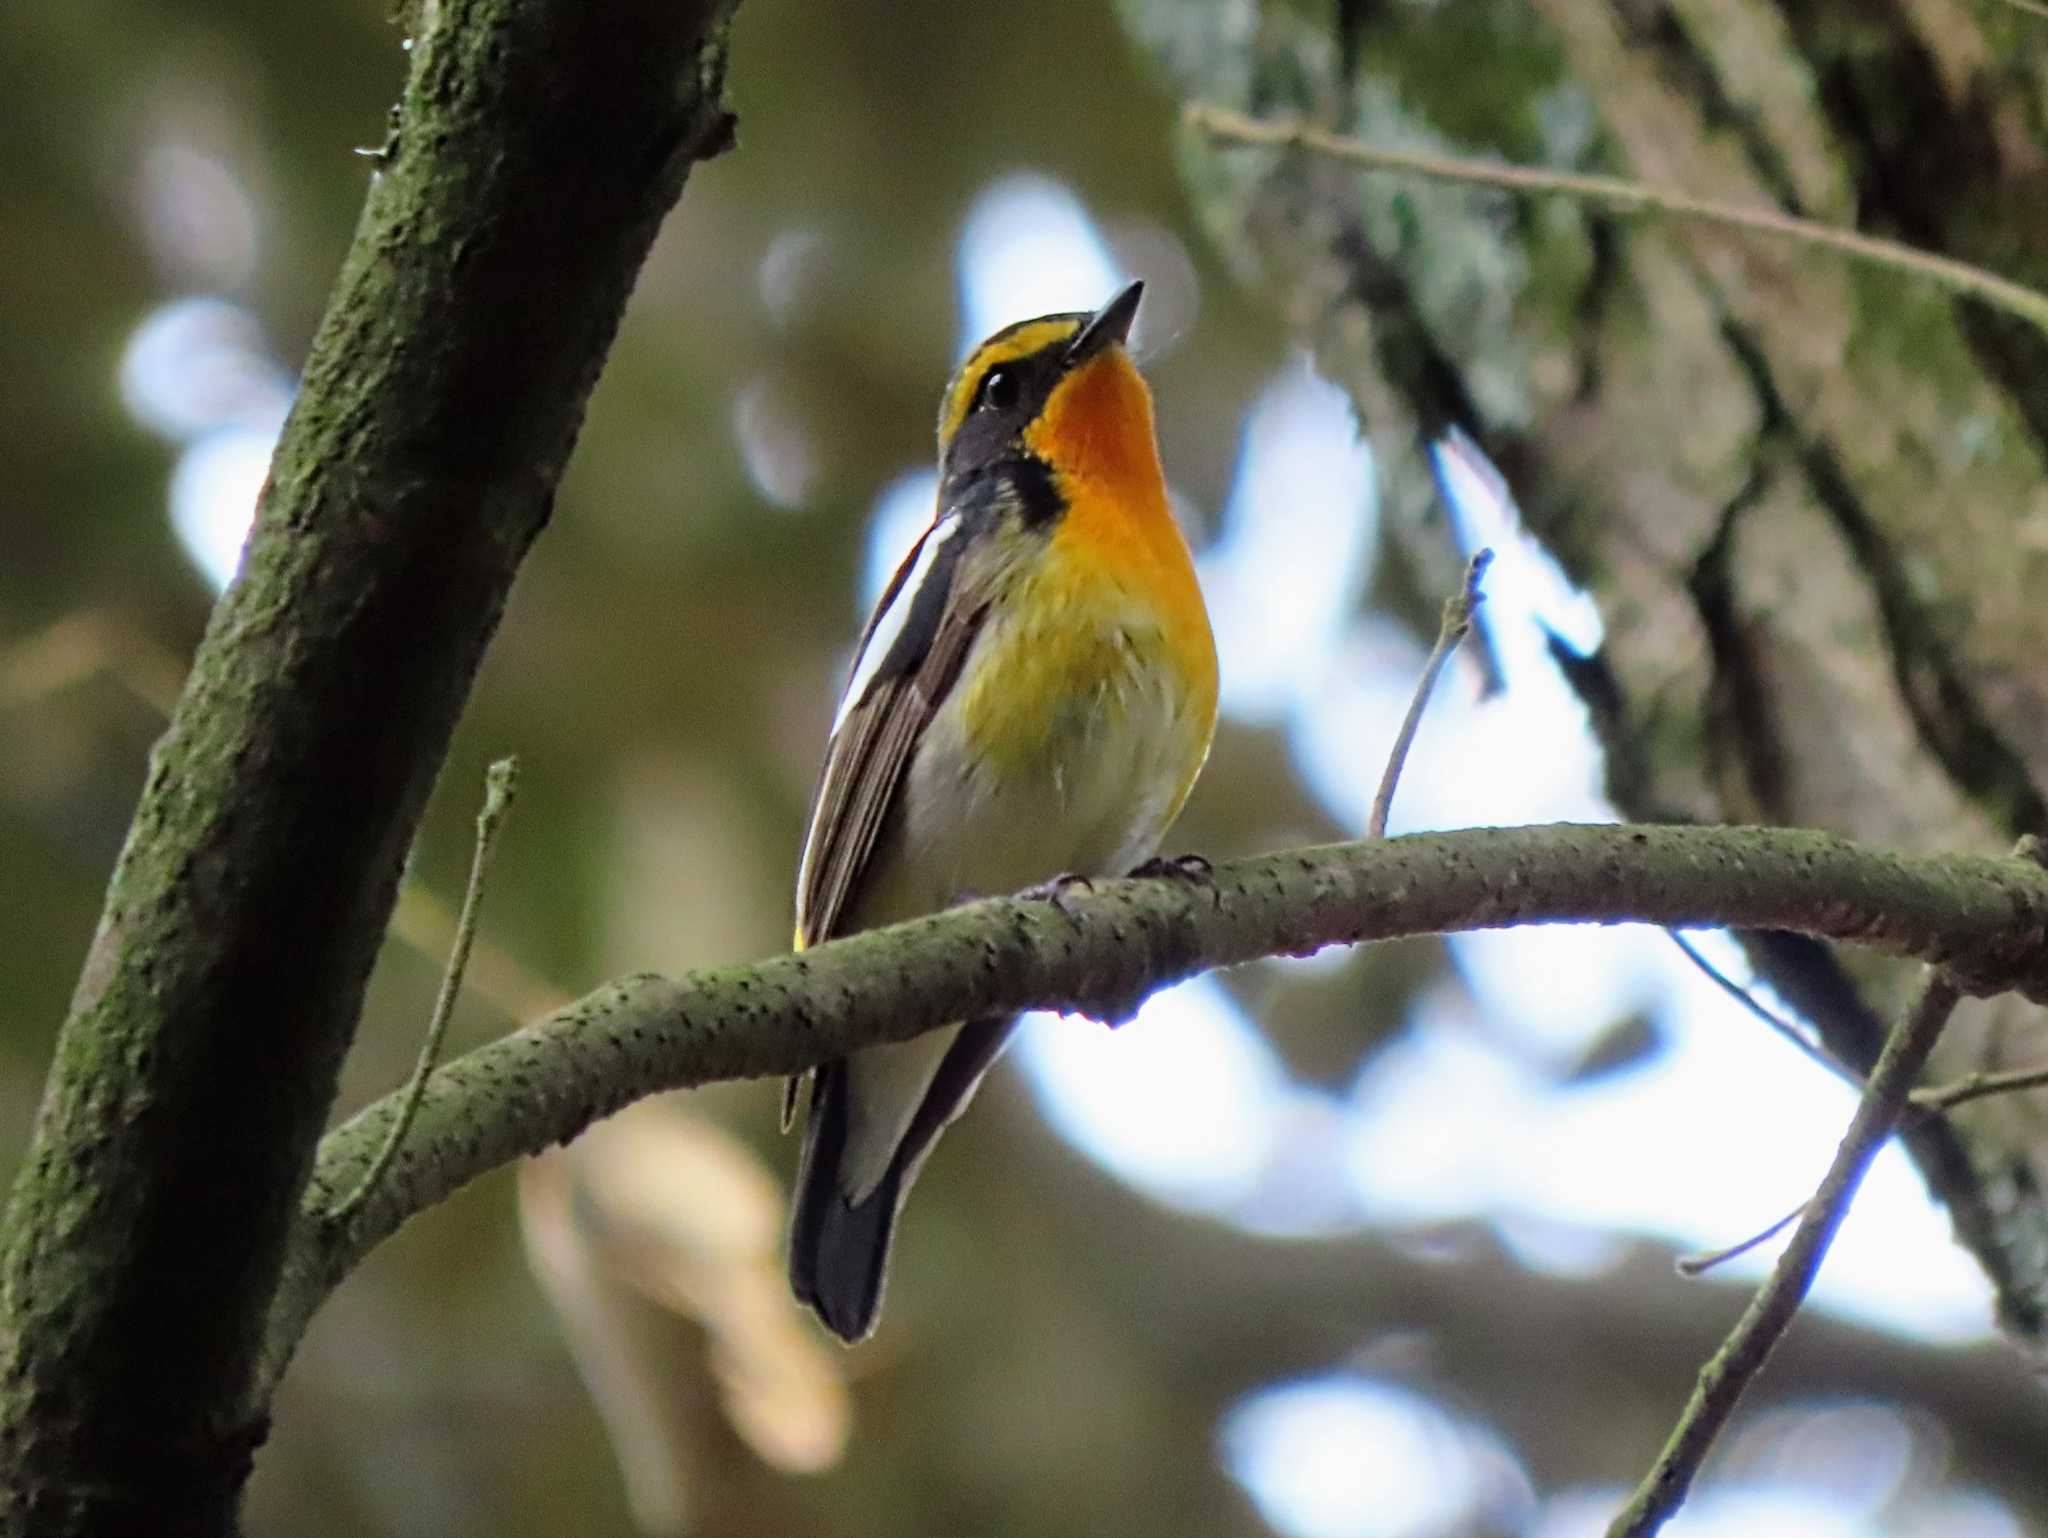 Photo of Narcissus Flycatcher at Nara Park by あなちゃん